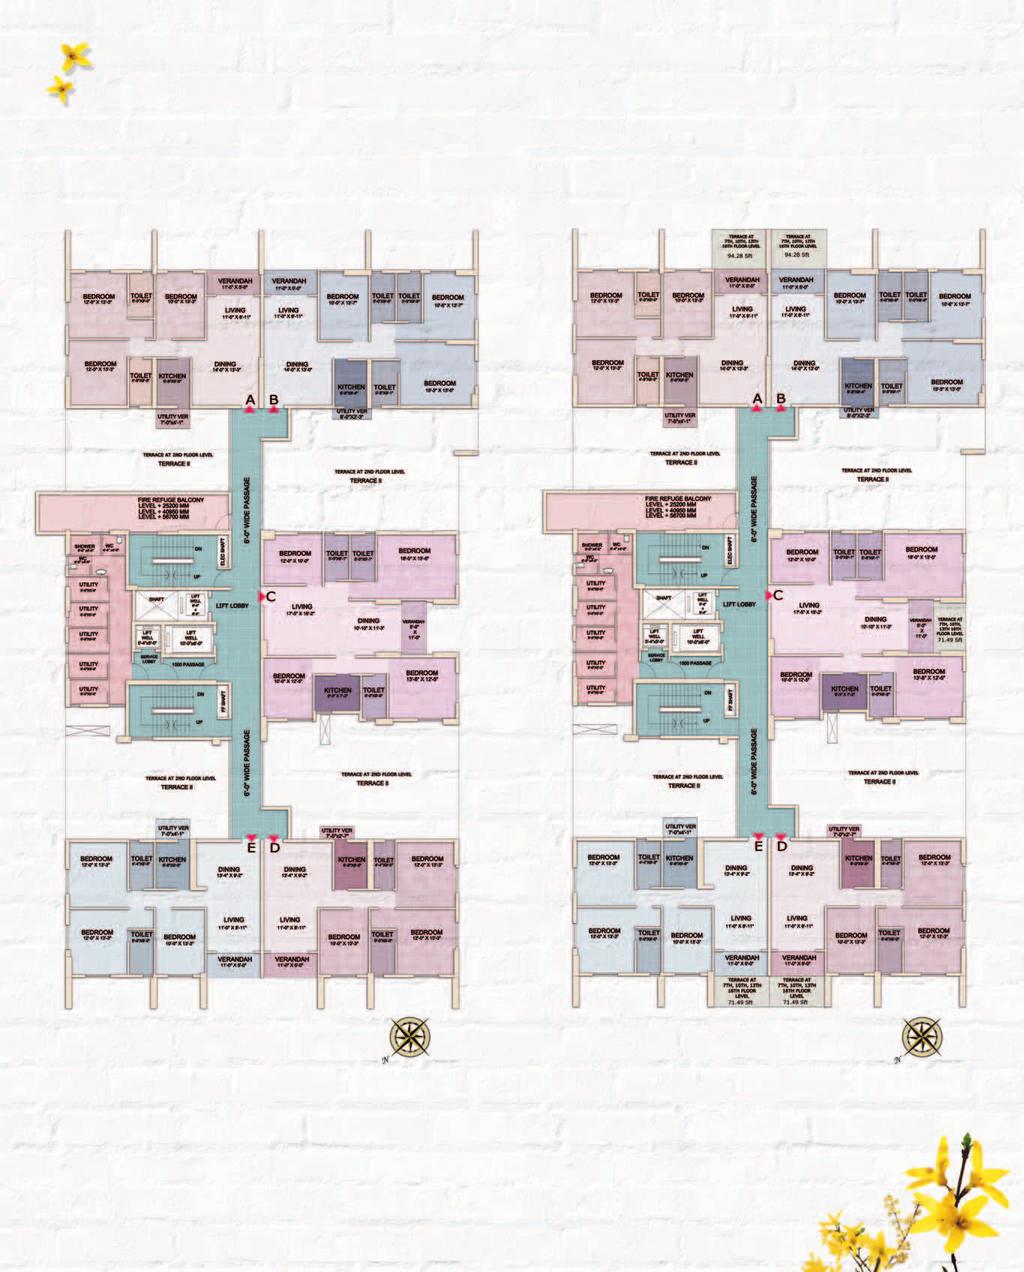 Typical Floor Plan without Terrace Plan of 3rd, 4th, 5th, 6th, 8th, 9th, 11th, 12th, 14th, 15th 17th &18th Floors Typical Floor Plan with Terrace Plan of 7th,10th,13th and16th Floors Area Statement